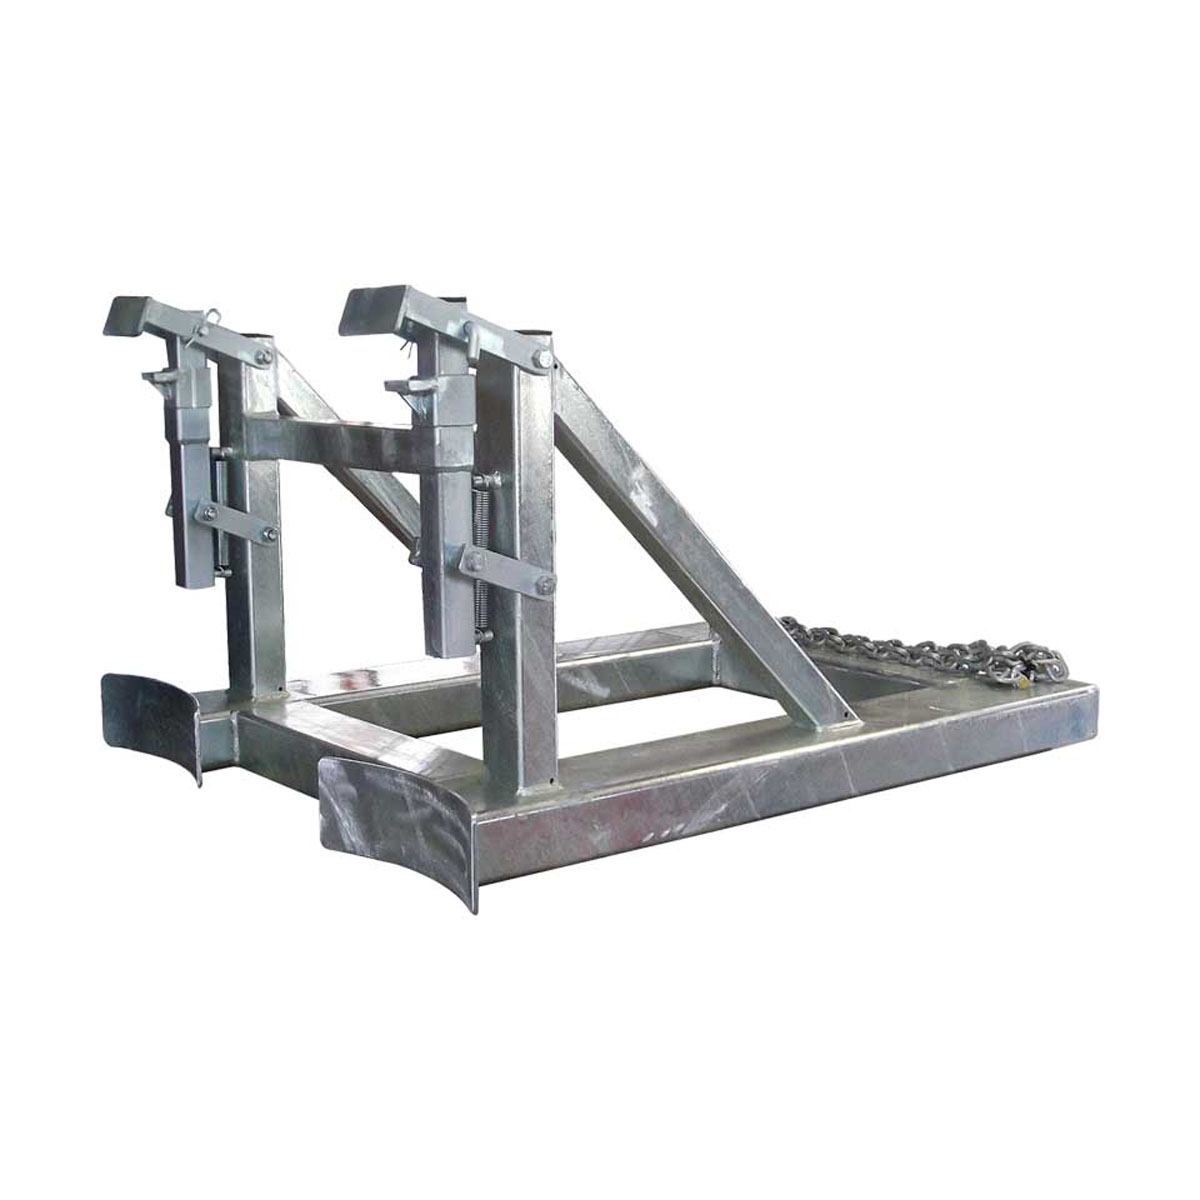 Buy Drum Lifter - Beak-Grip Forklift Attachment (Double) in Forklift Attachments from Astrolift NZ